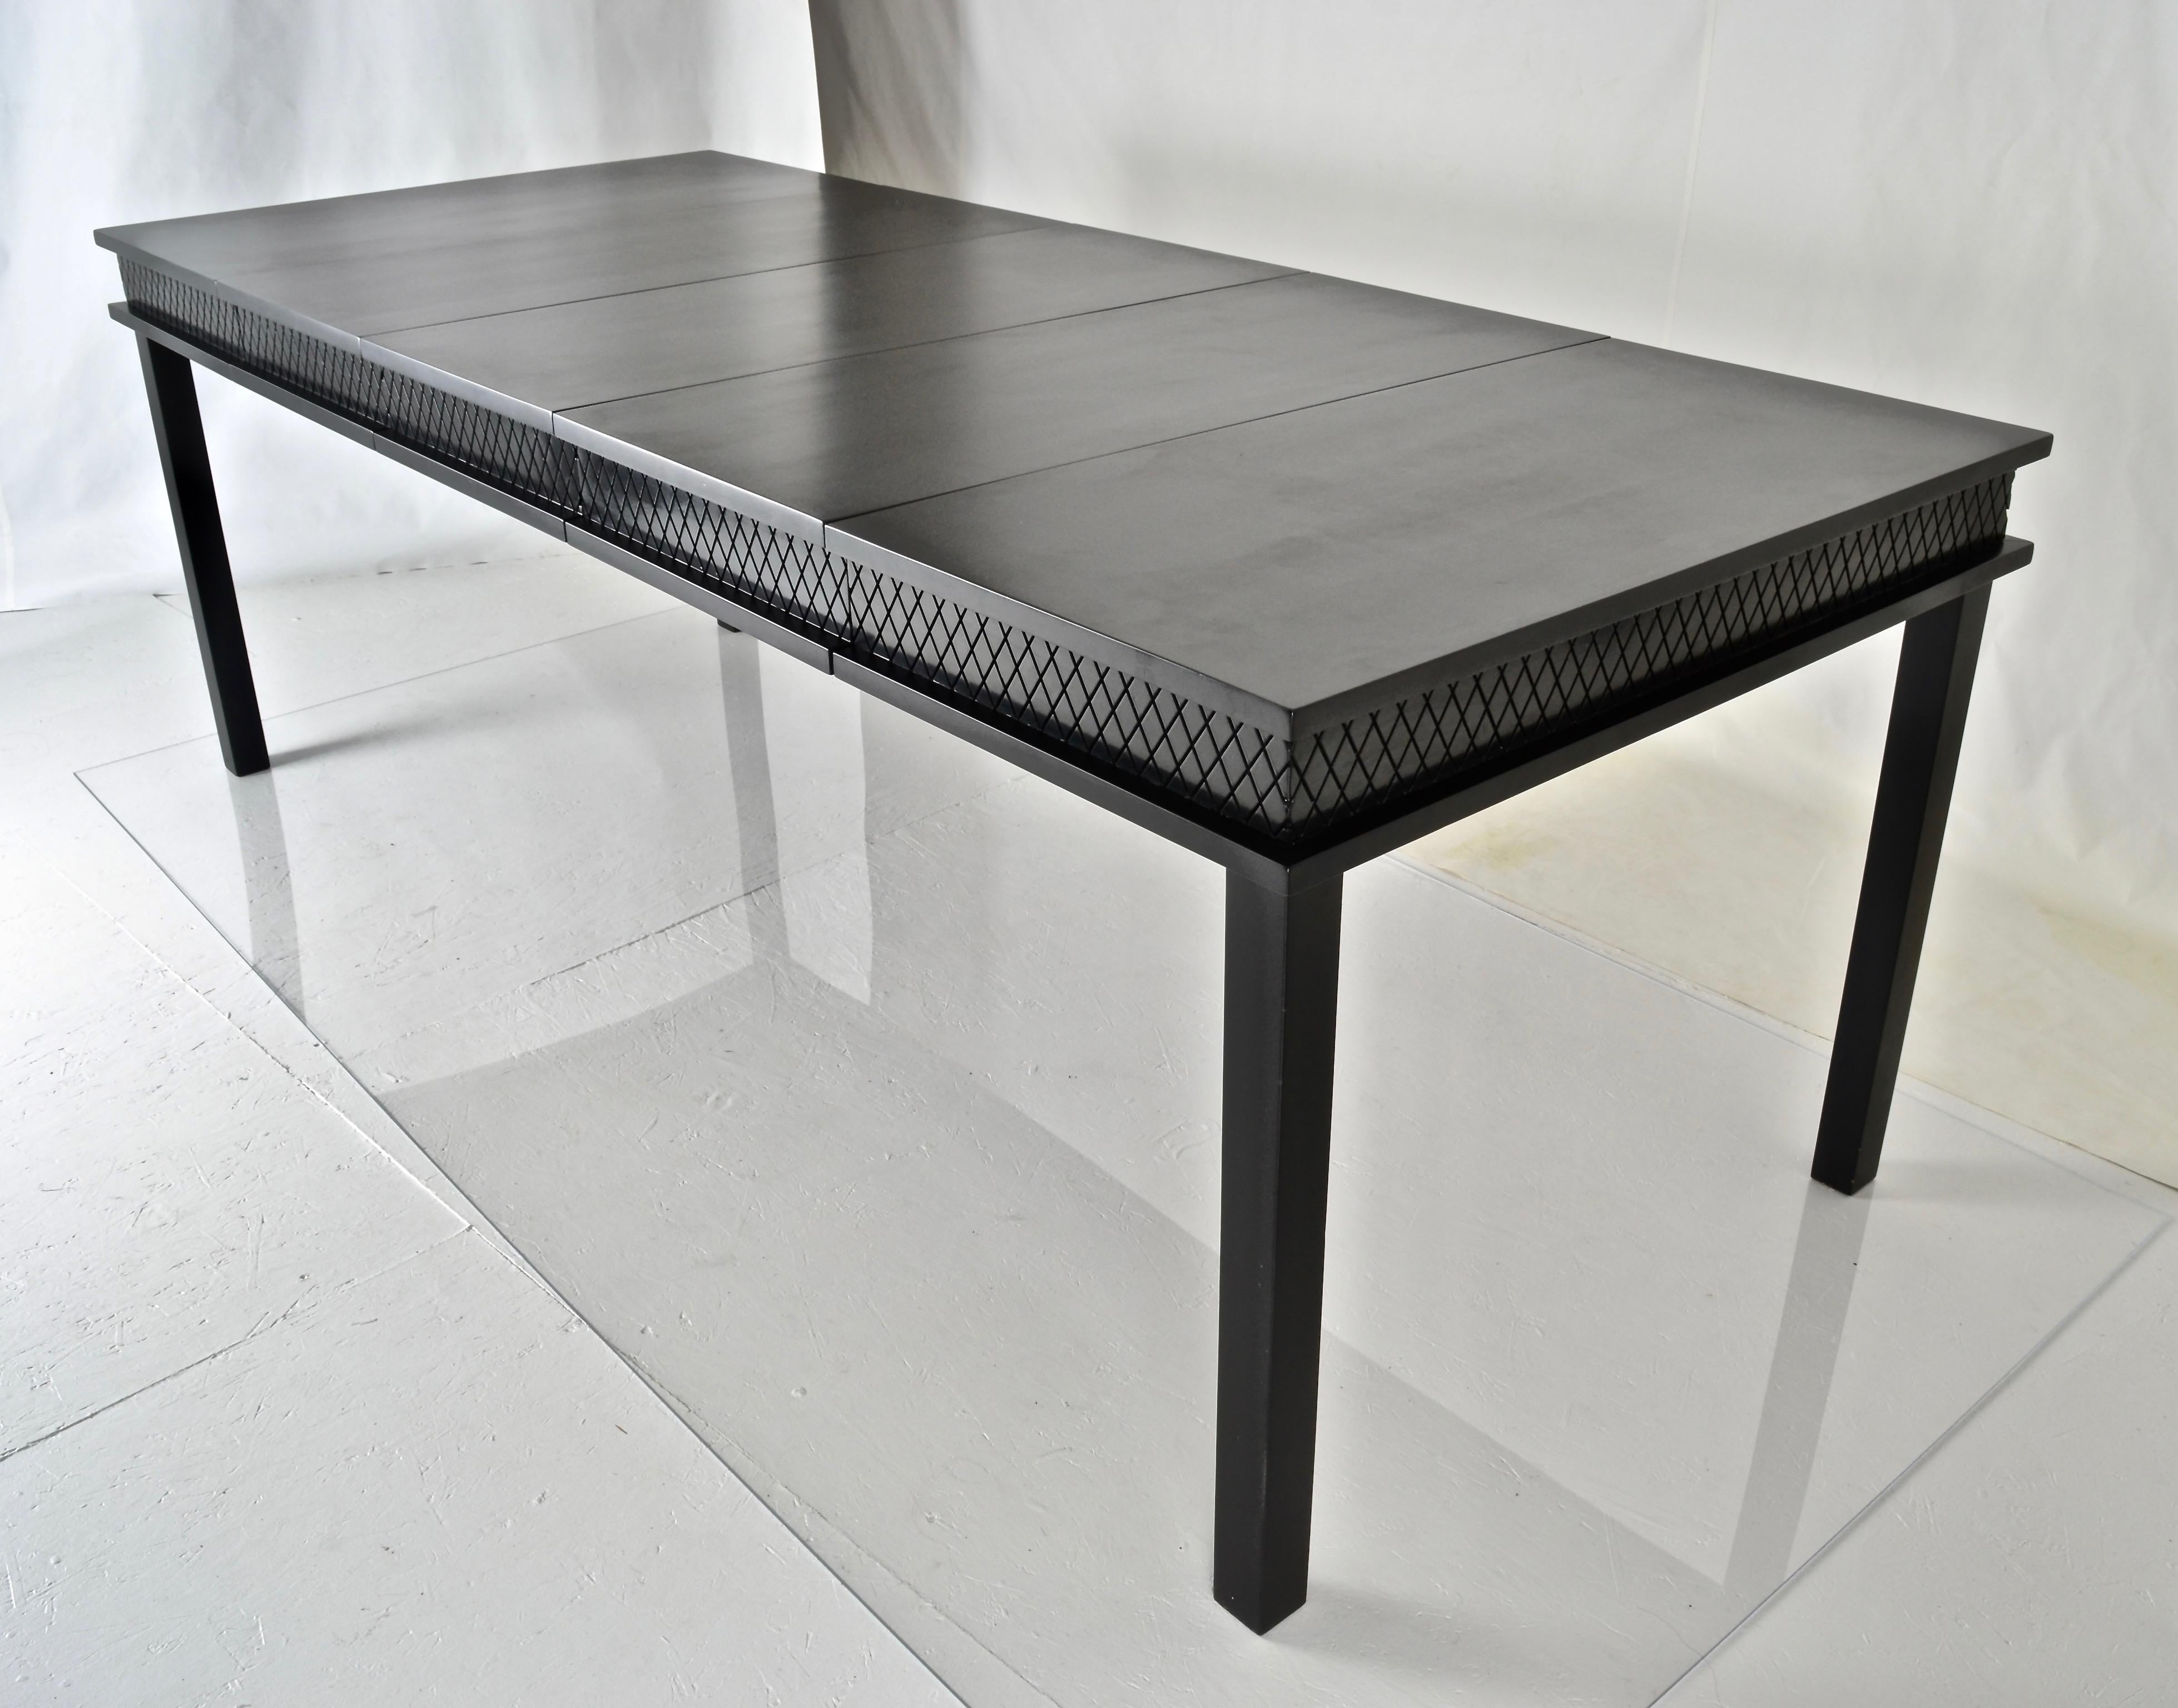 This James Mont dining table with four accompanying chairs has been newly lacquered in satin black with the table apron in gloss black. The table expands from a 36